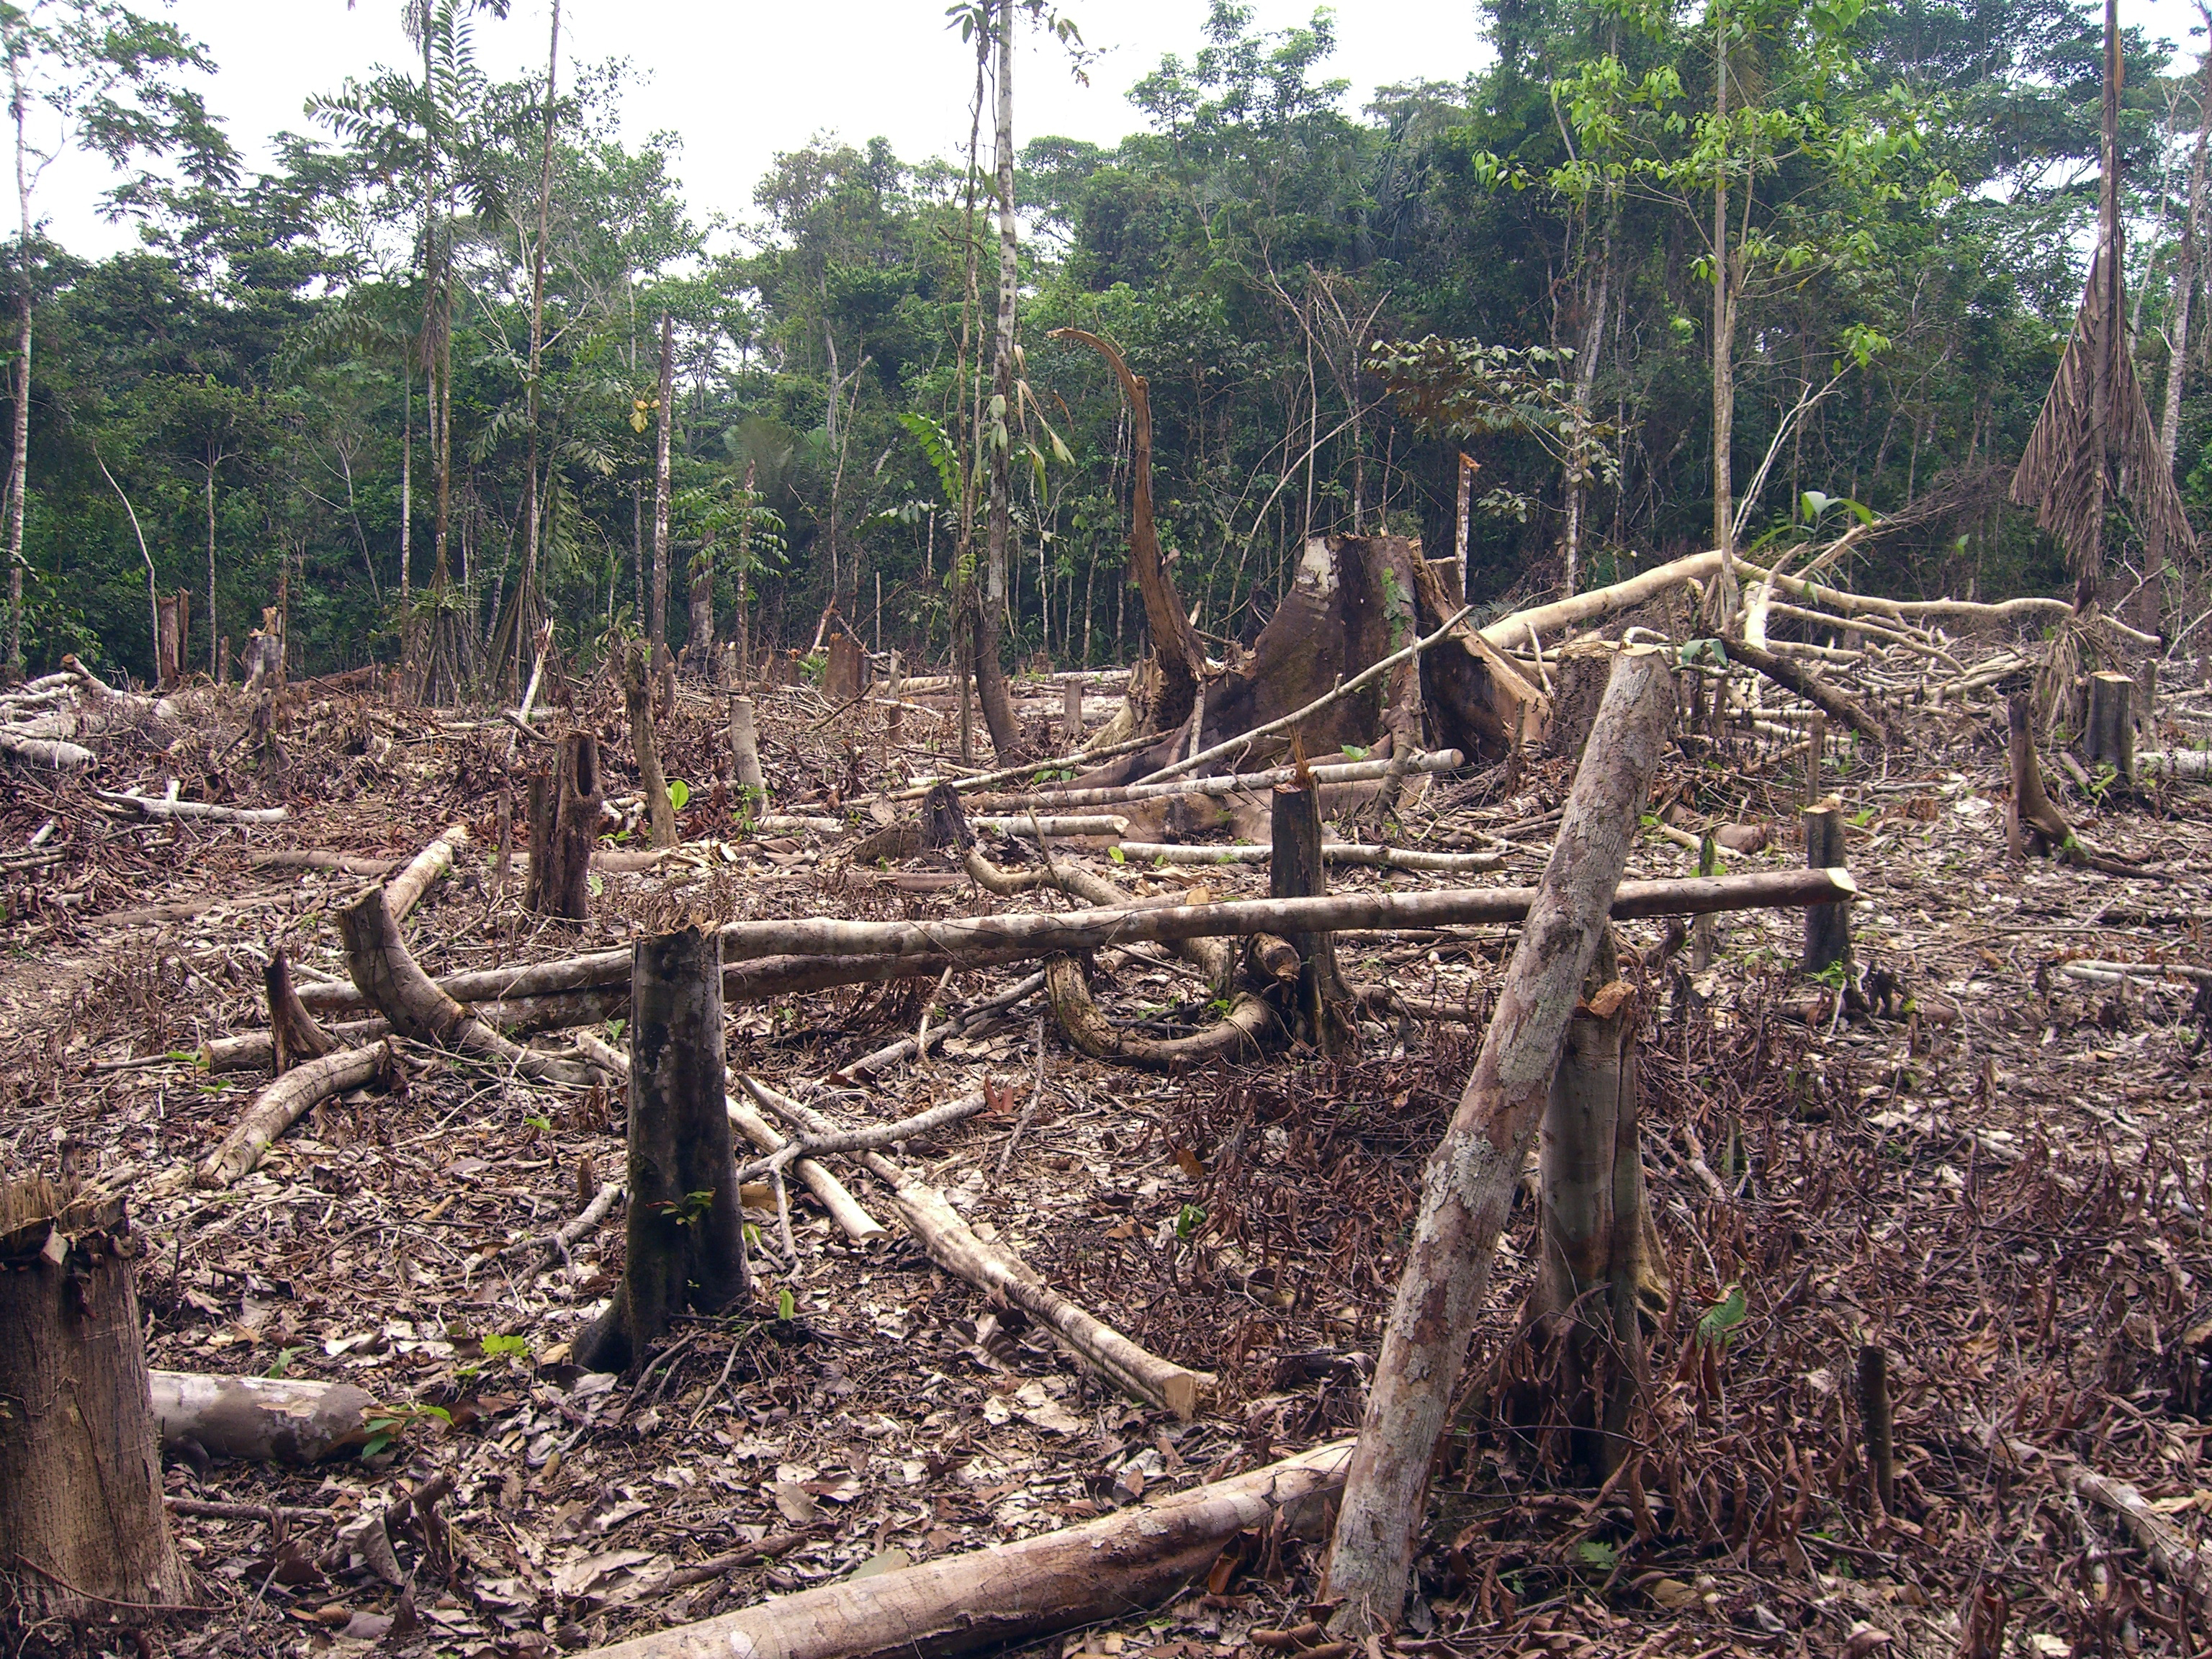 File:Amazon slash and burn agriculture Colombia South America.jpg - Wikimedia Commons